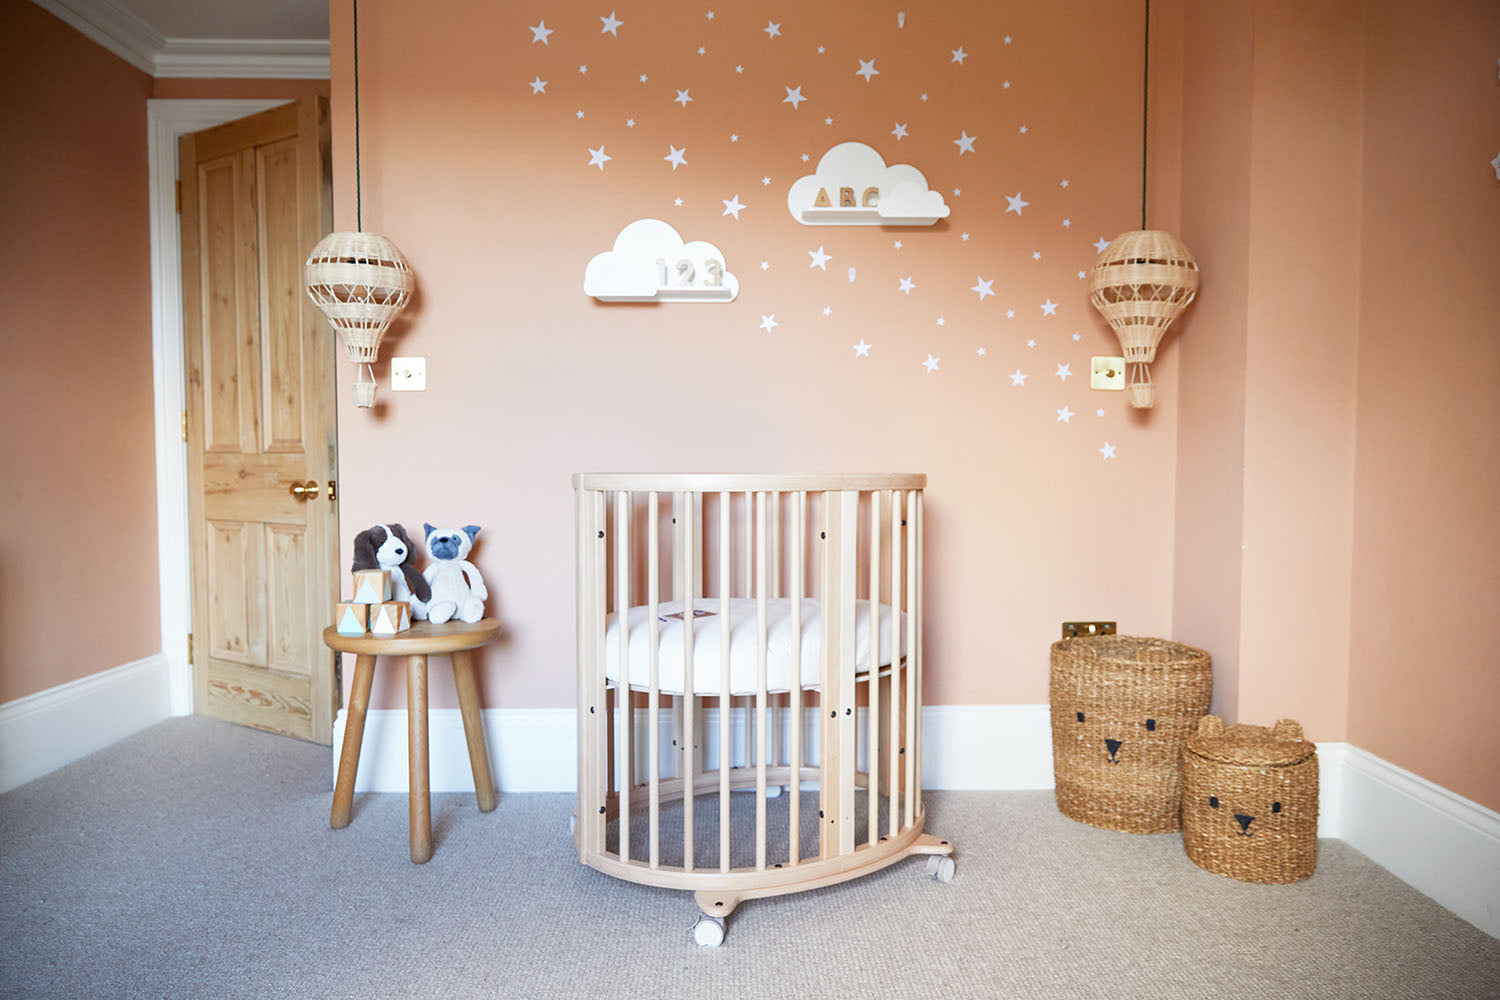 A Guide to Moving Your Baby Into Their Own Room - NEST’s Top Tips